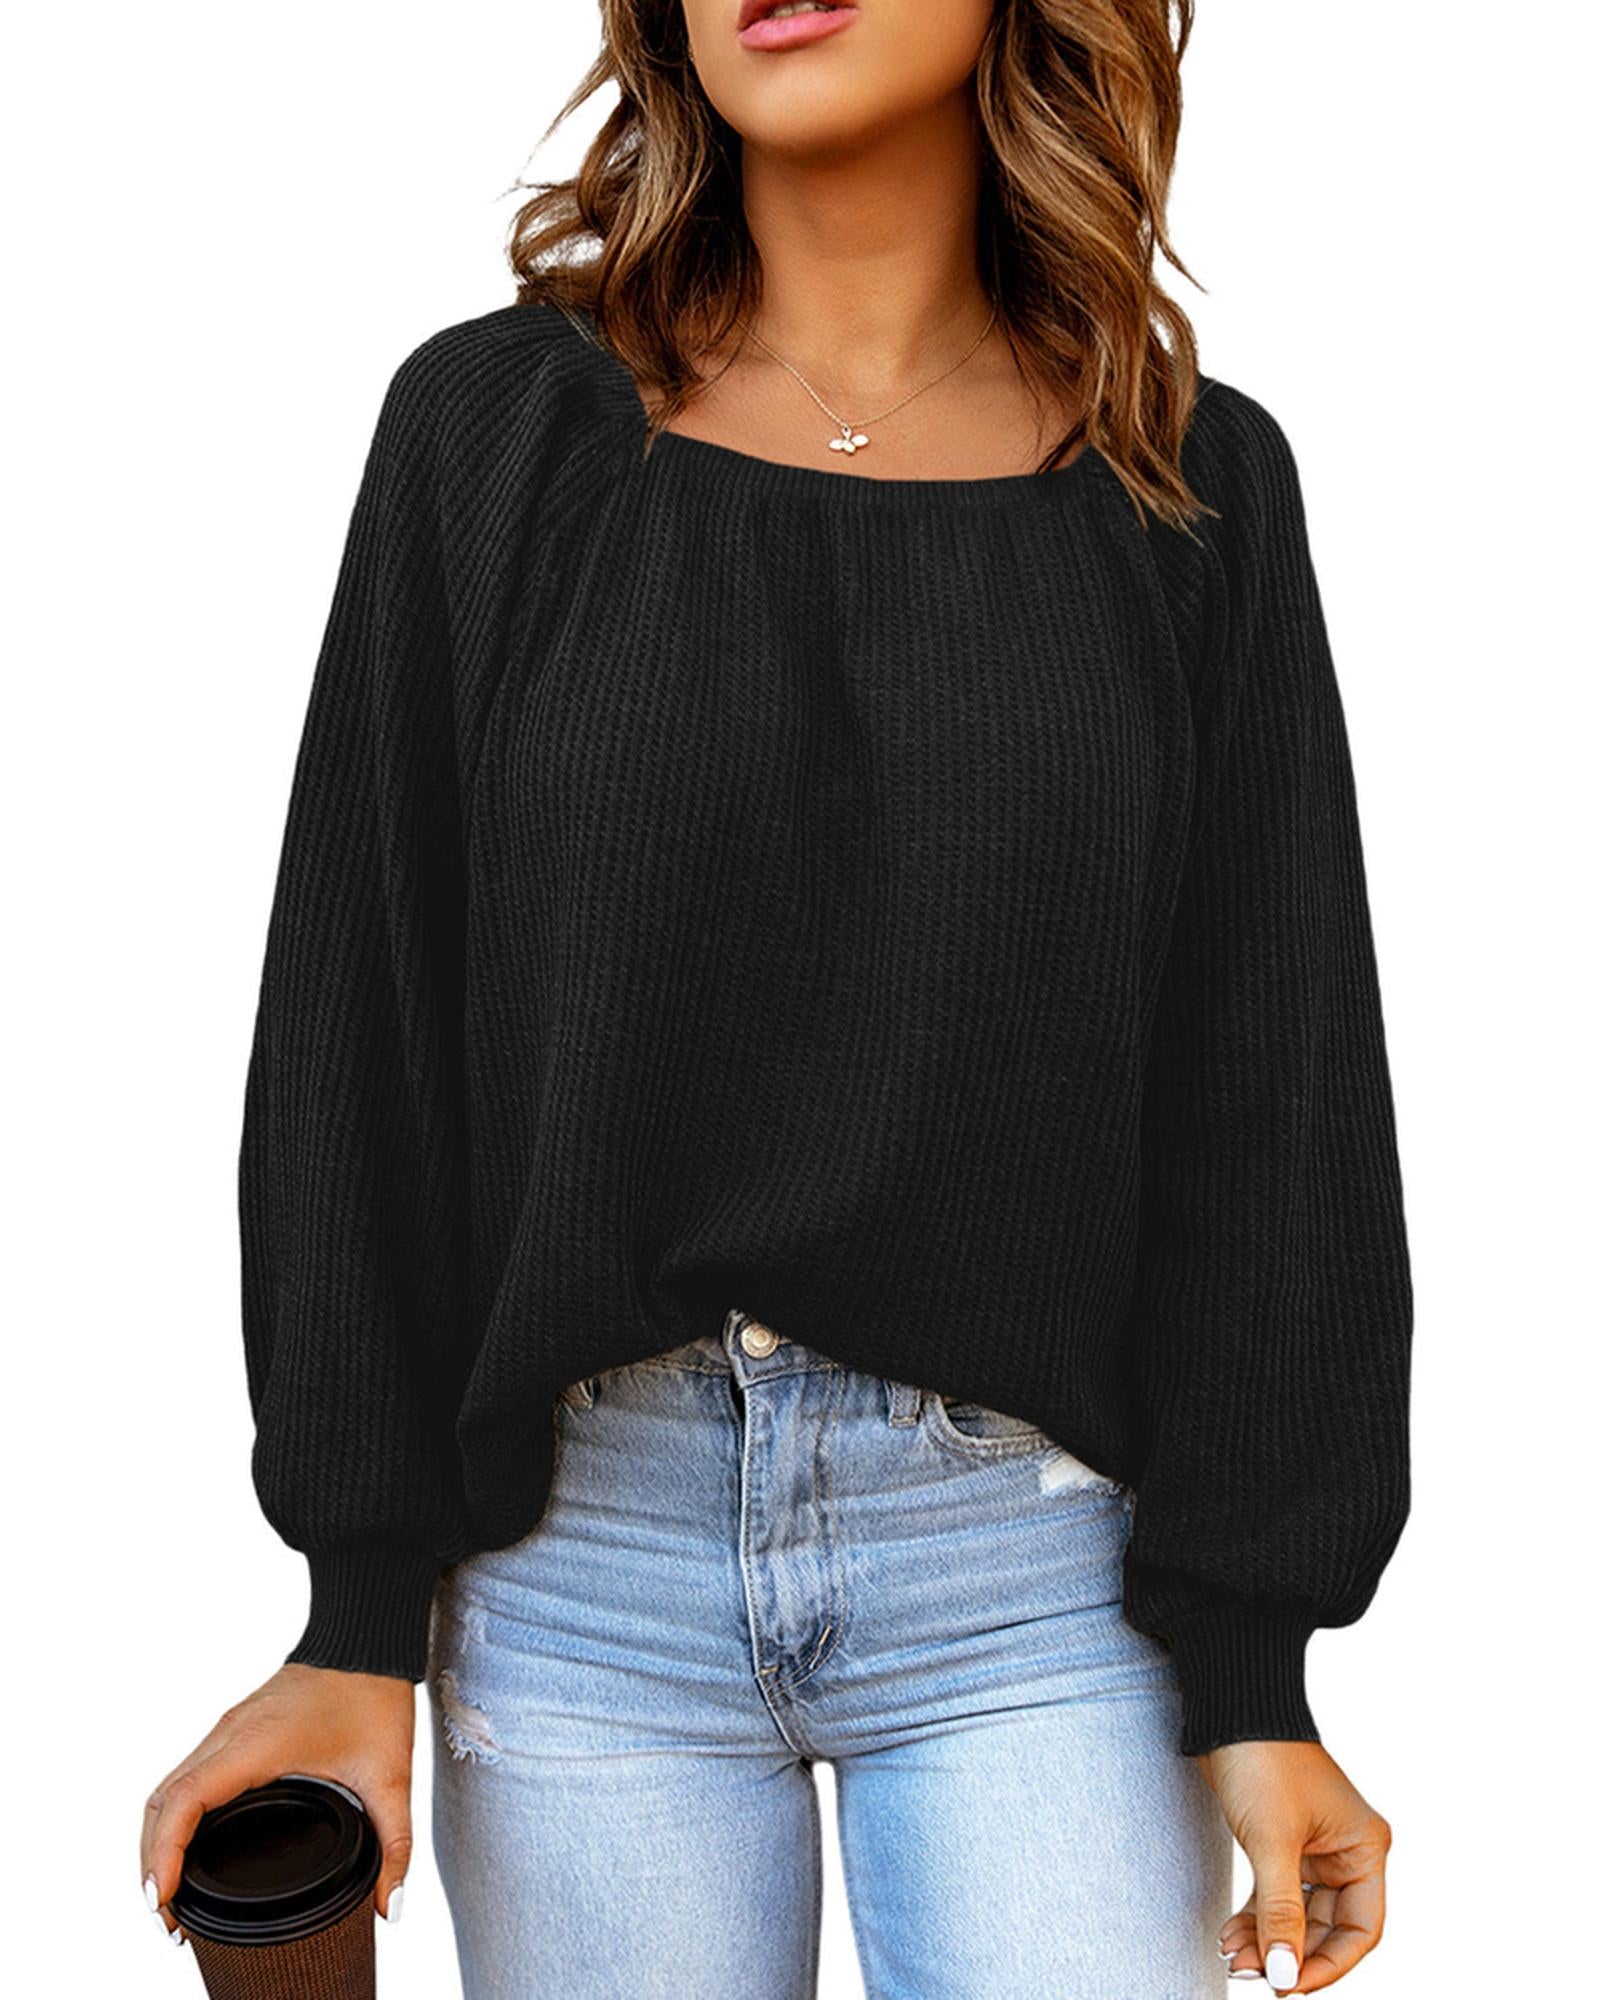 Puff Sleeve Waffle Knit Top - S